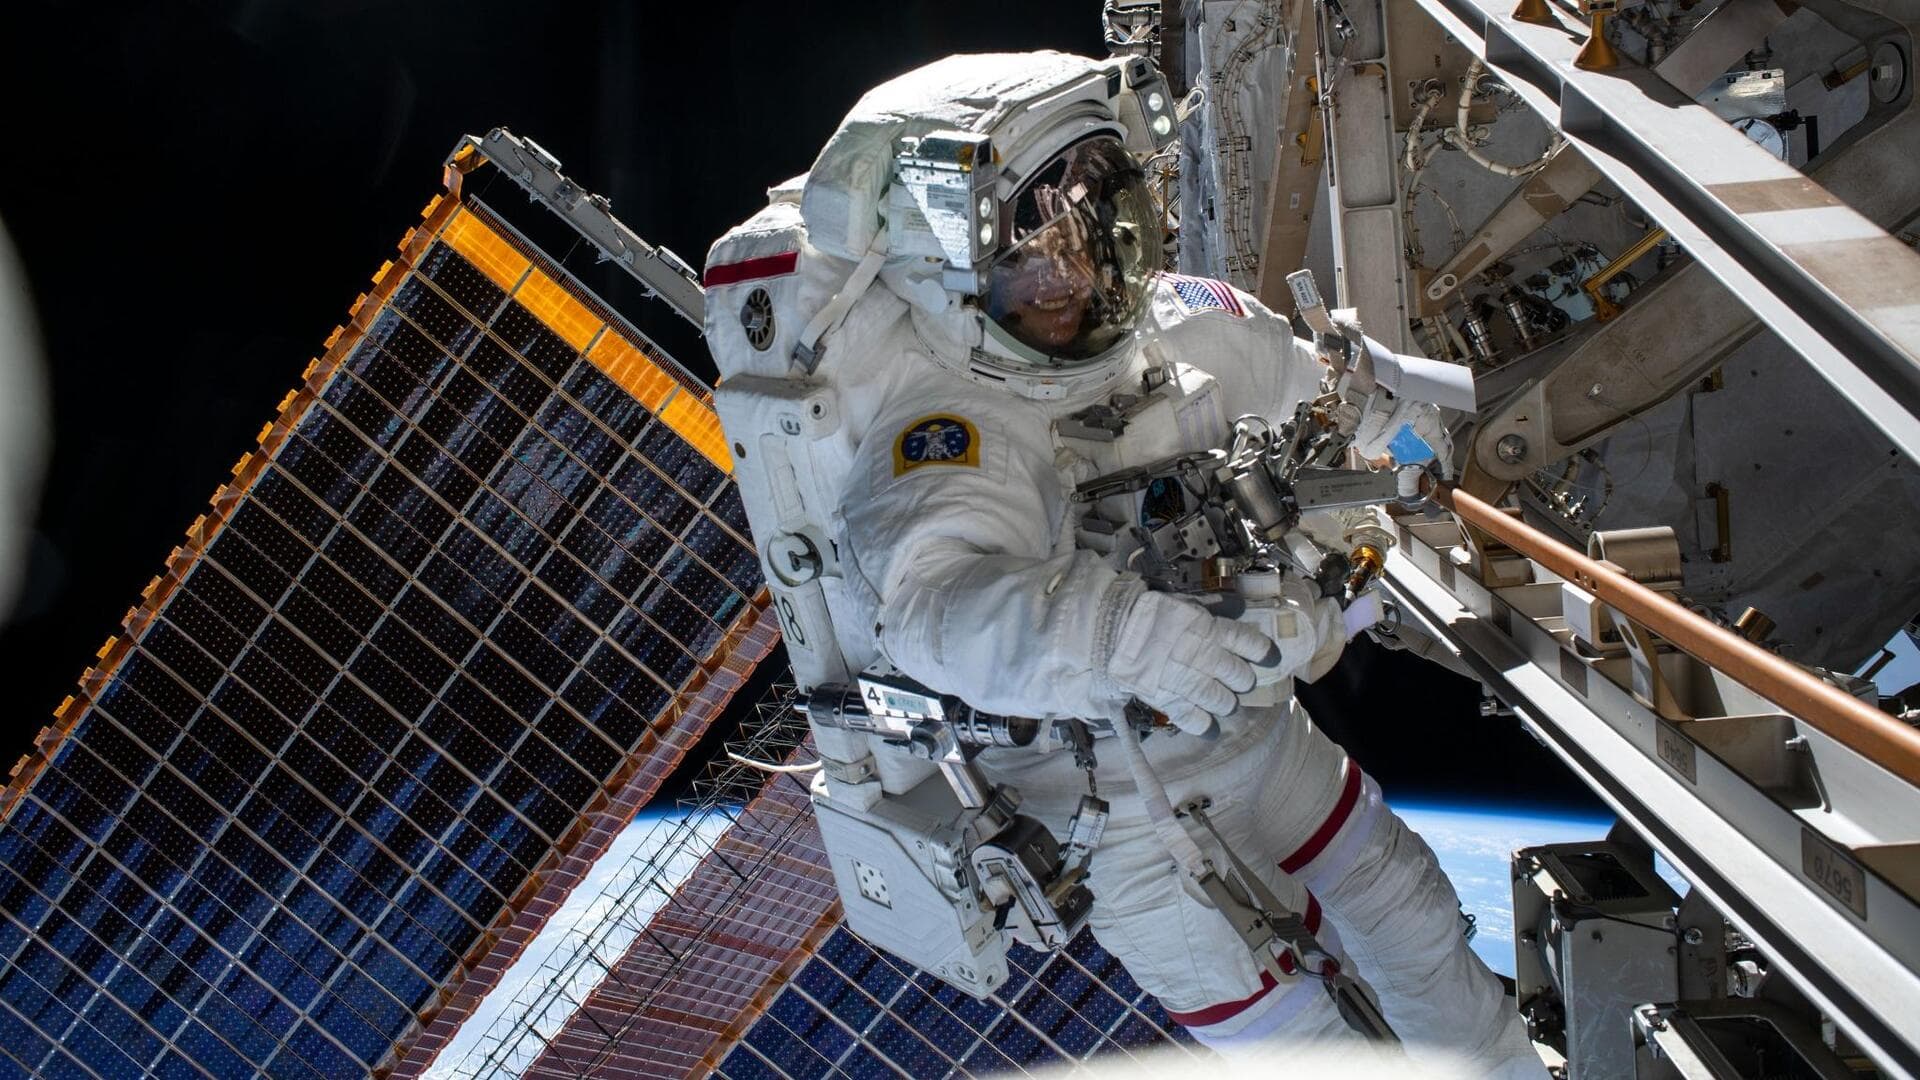 NASA terminates $100 million spacesuit manufacturing contract with Collins Aerospace